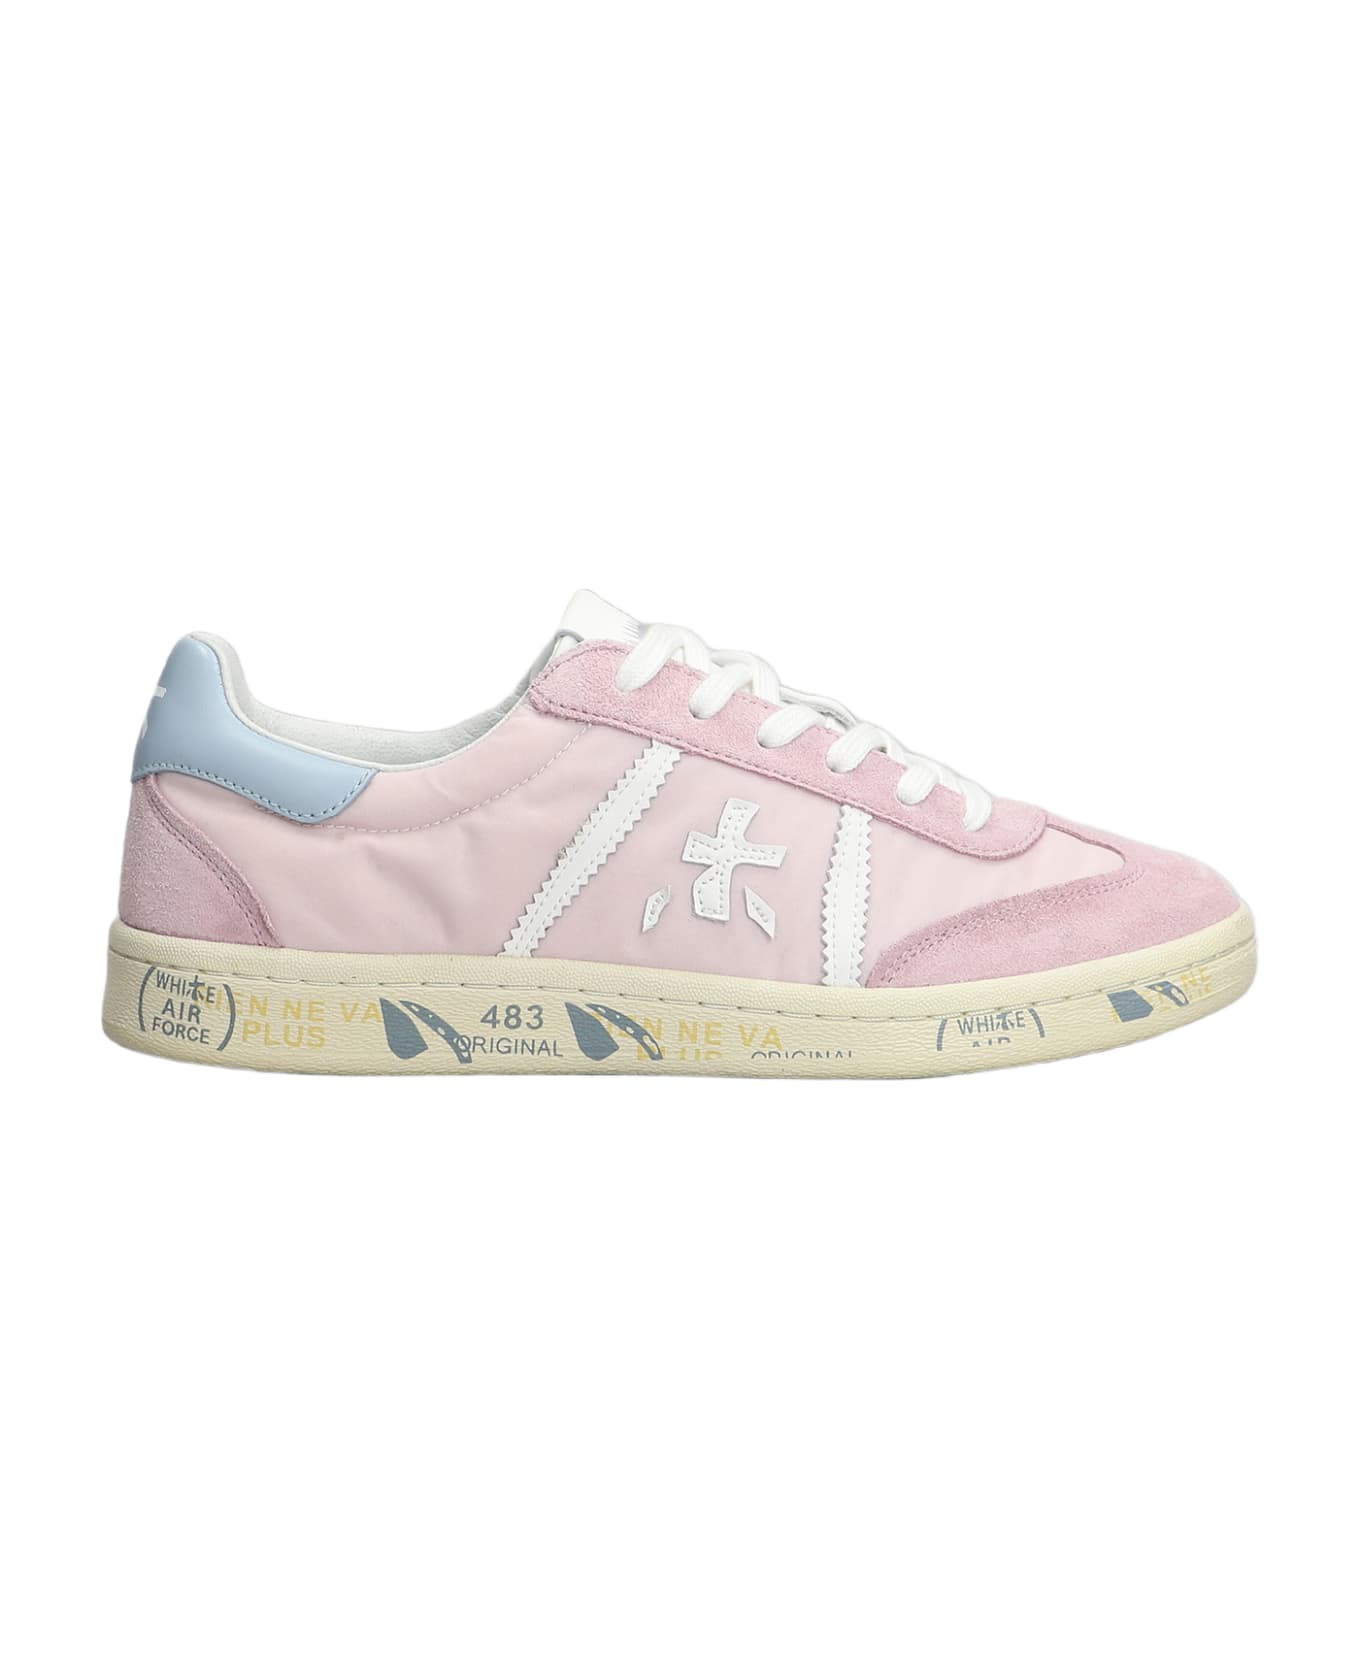 Premiata Bonnie Sneakers In Rose-pink Suede And Fabric - rose-pink